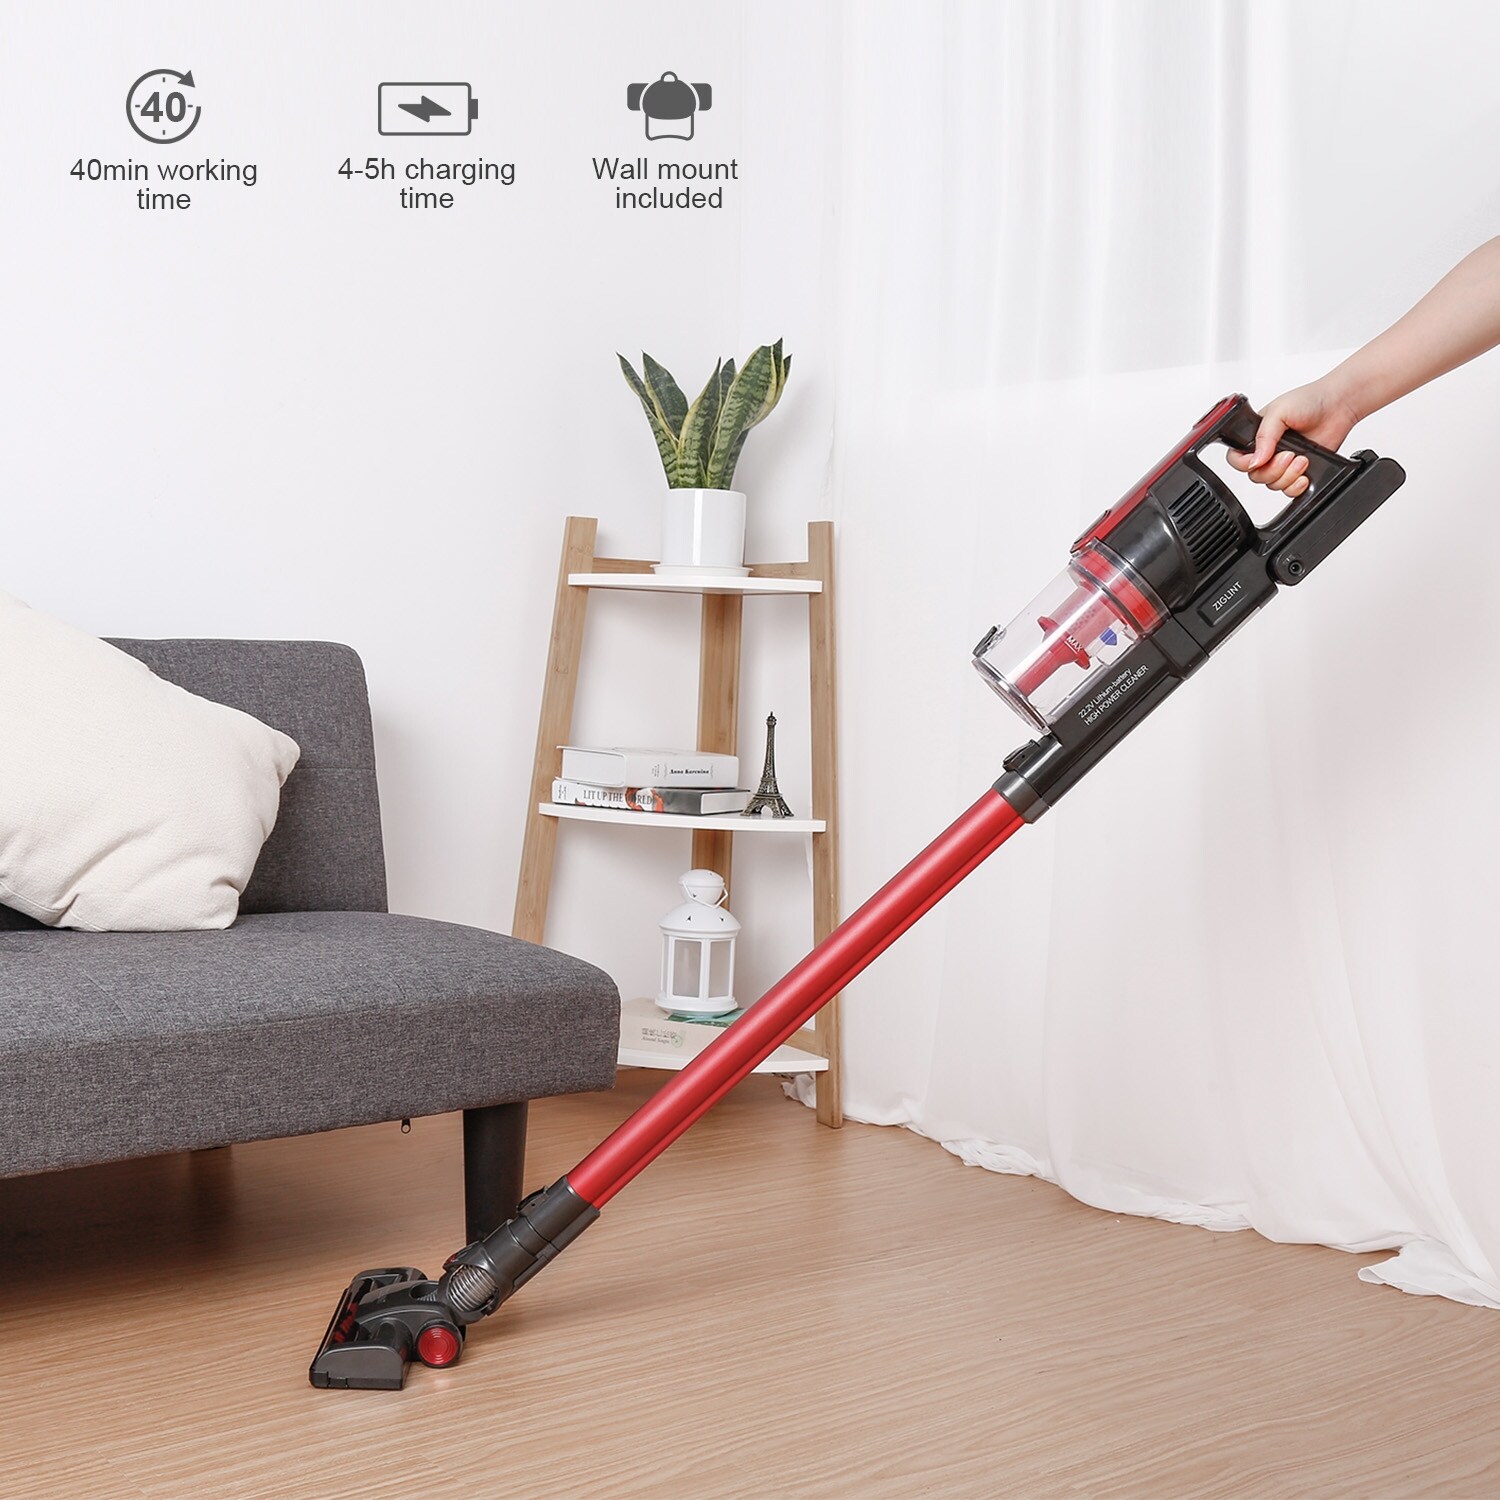 https://ak1.ostkcdn.com/images/products/is/images/direct/8f11598f1b32942b2bbc6c3529b2f5a6c20777cb/ZIGLINT-Z5-Cordless-Vacuum-Cleaner-2-in-1-Stick-and-Handheld-Portable-Vacuum-with-8KPa-High-Suction.jpg